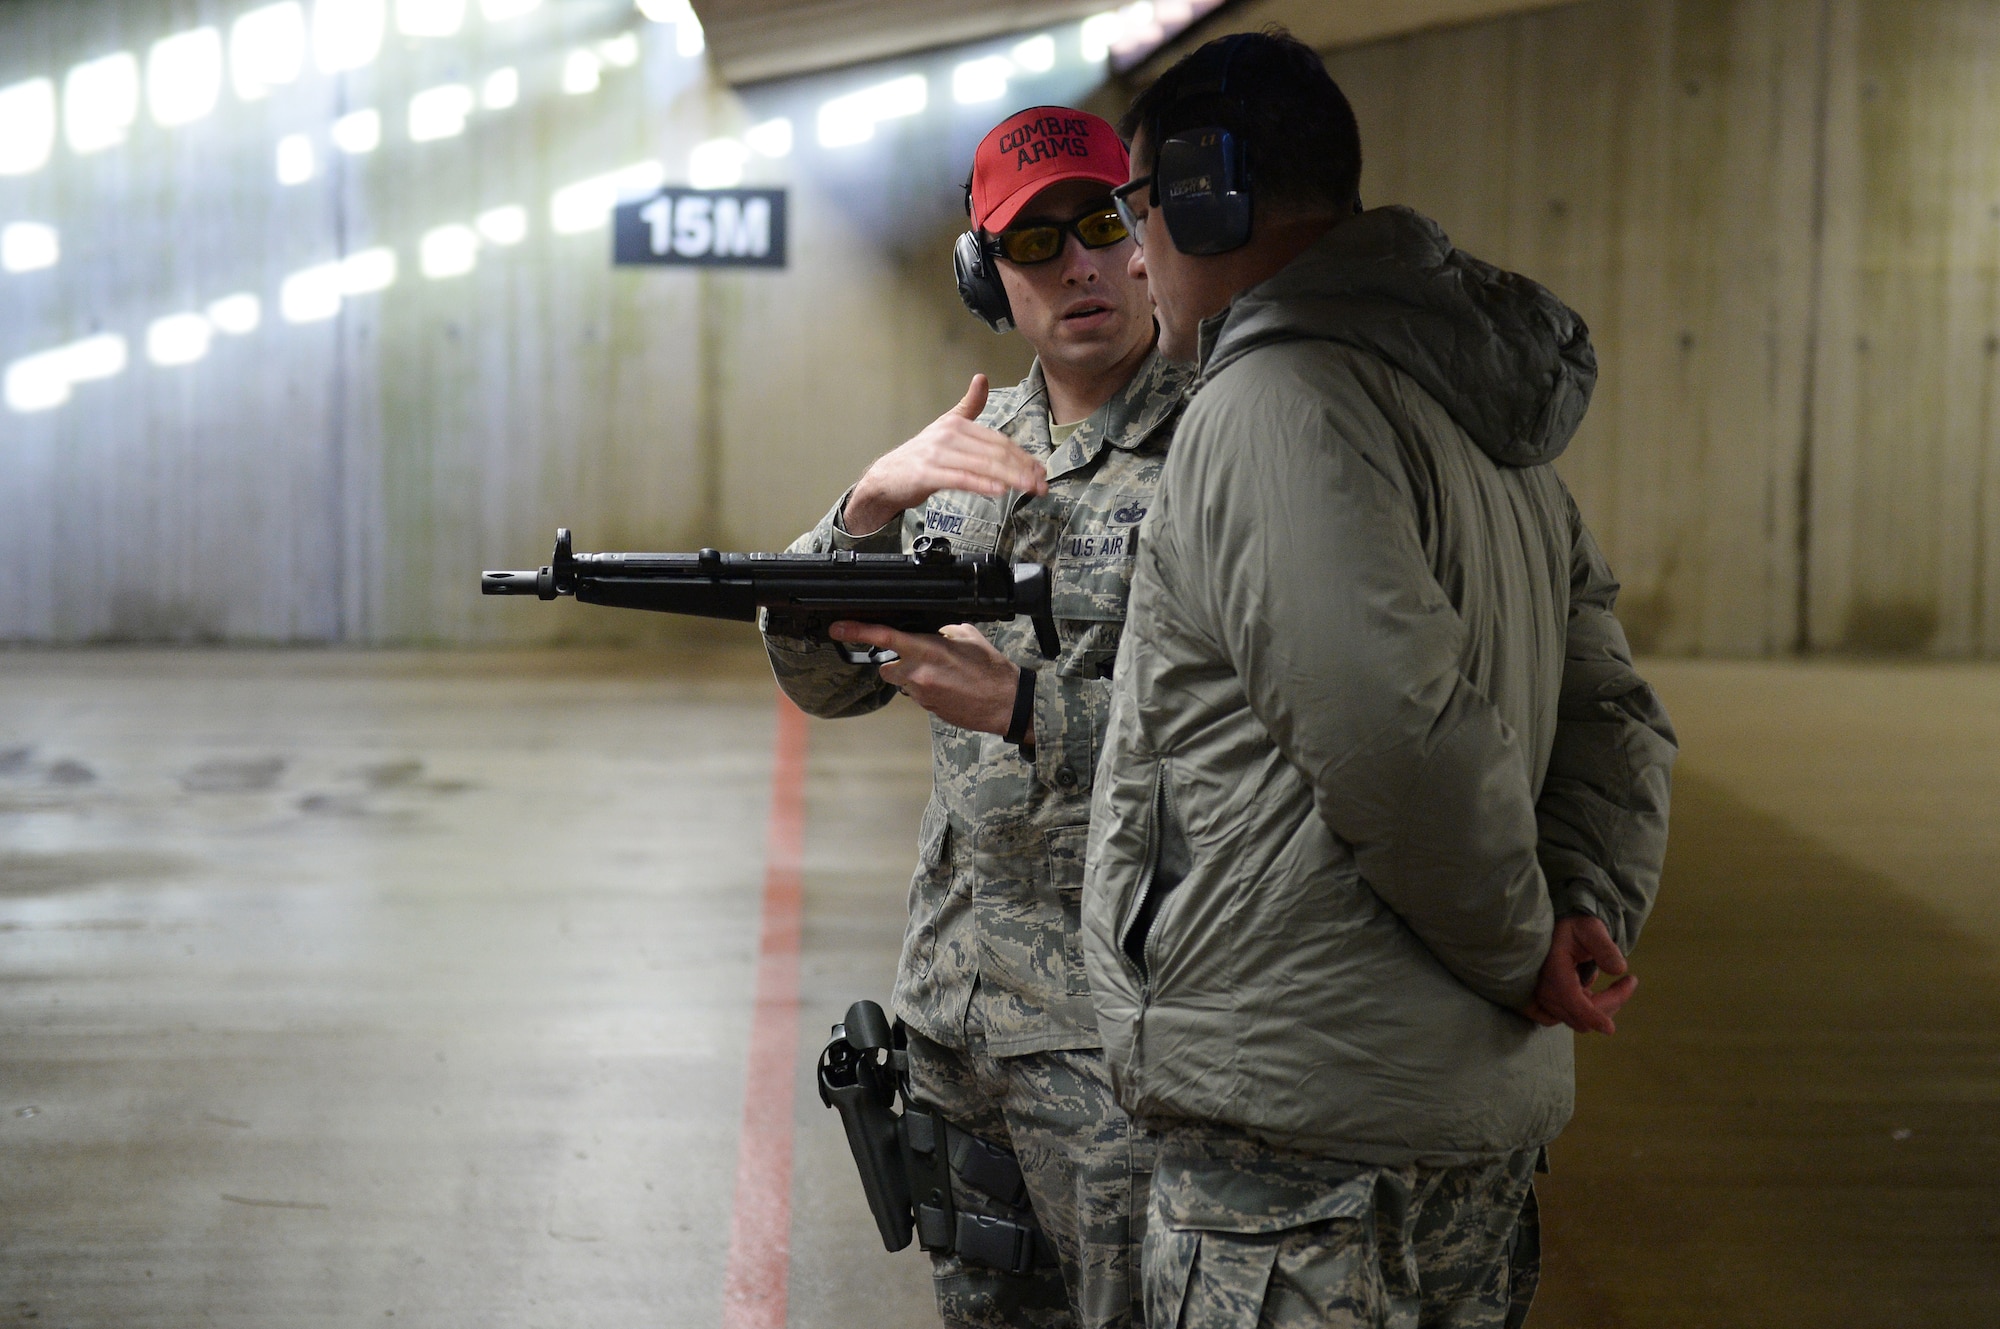 Staff Sgt. Bradley Nendel, 48th Security Forces Squadron combat arms instructor,  instructs  Col. John Devillier, 88th Air Base Wing commander, on firing an MP5 submachine gun during an Installation Excellence Selection Board visit on Royal Air Force Feltwell, England, Jan. 15, 2015. The IESB visited RAF Lakenheath to determine the winner of the Commander in Chief’s Annual Award for Installation Excellence. (U.S. Air Force photo by Staff Sgt. Emerson Nuñez/Released)